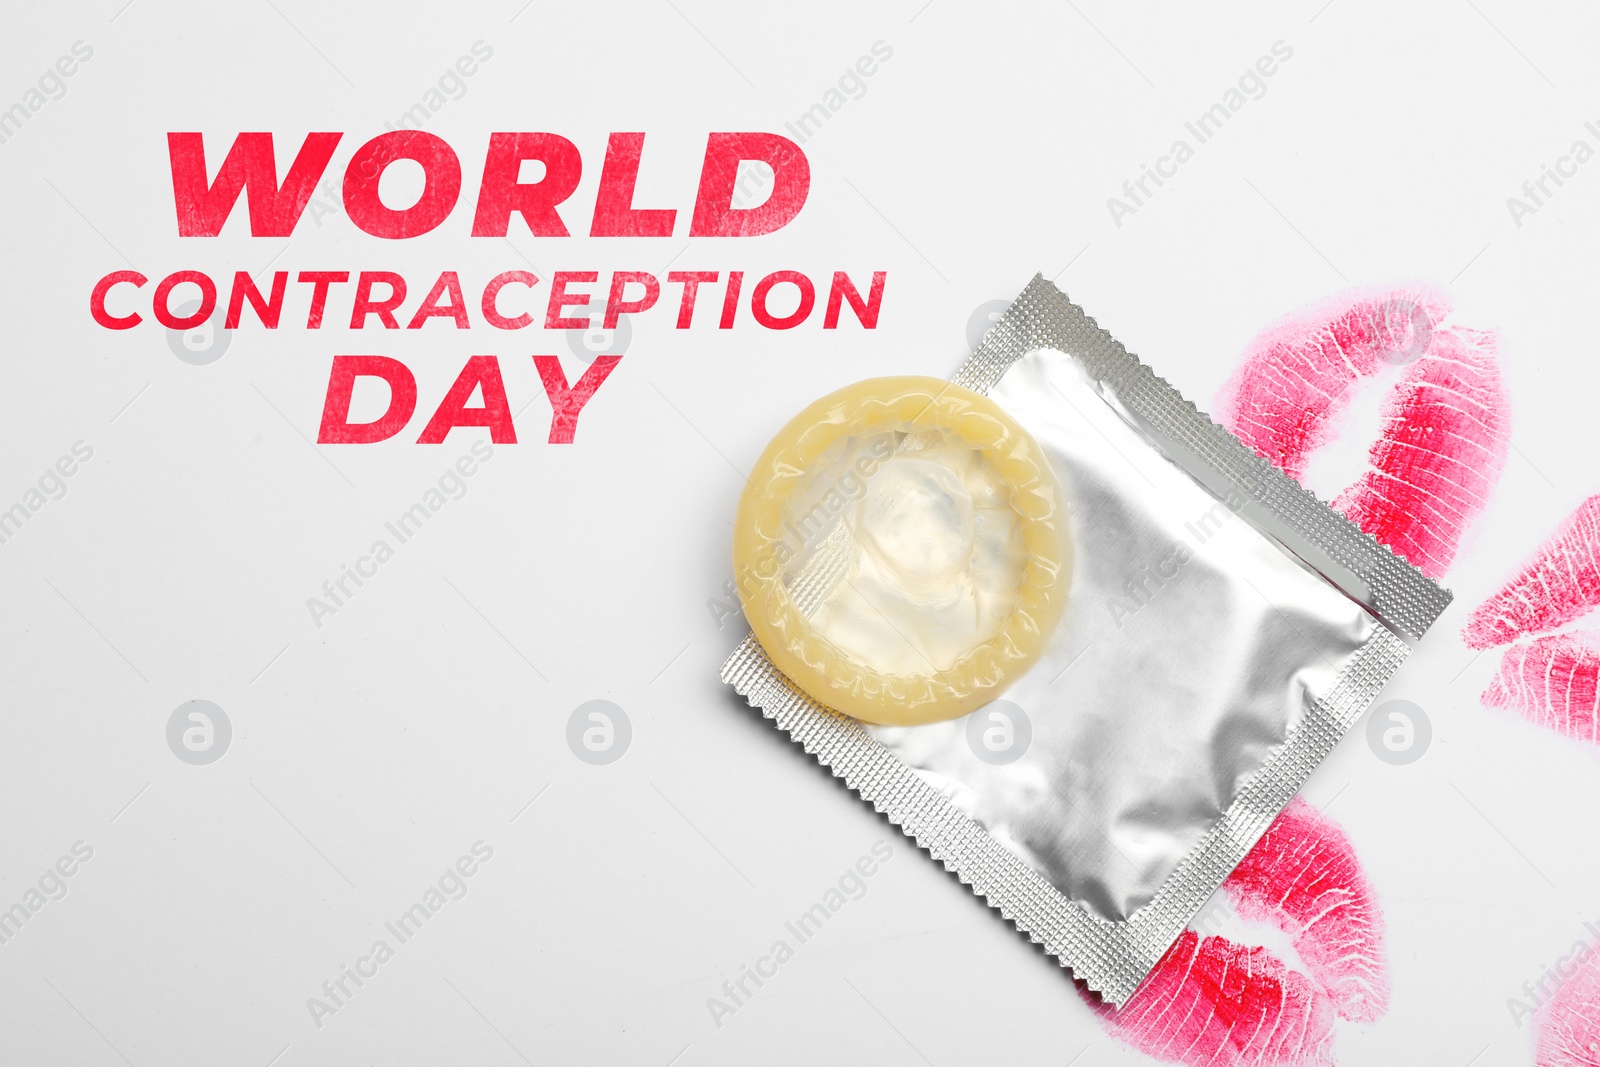 Image of World contraception day. Condom and lipstick kiss marks on white background, top view